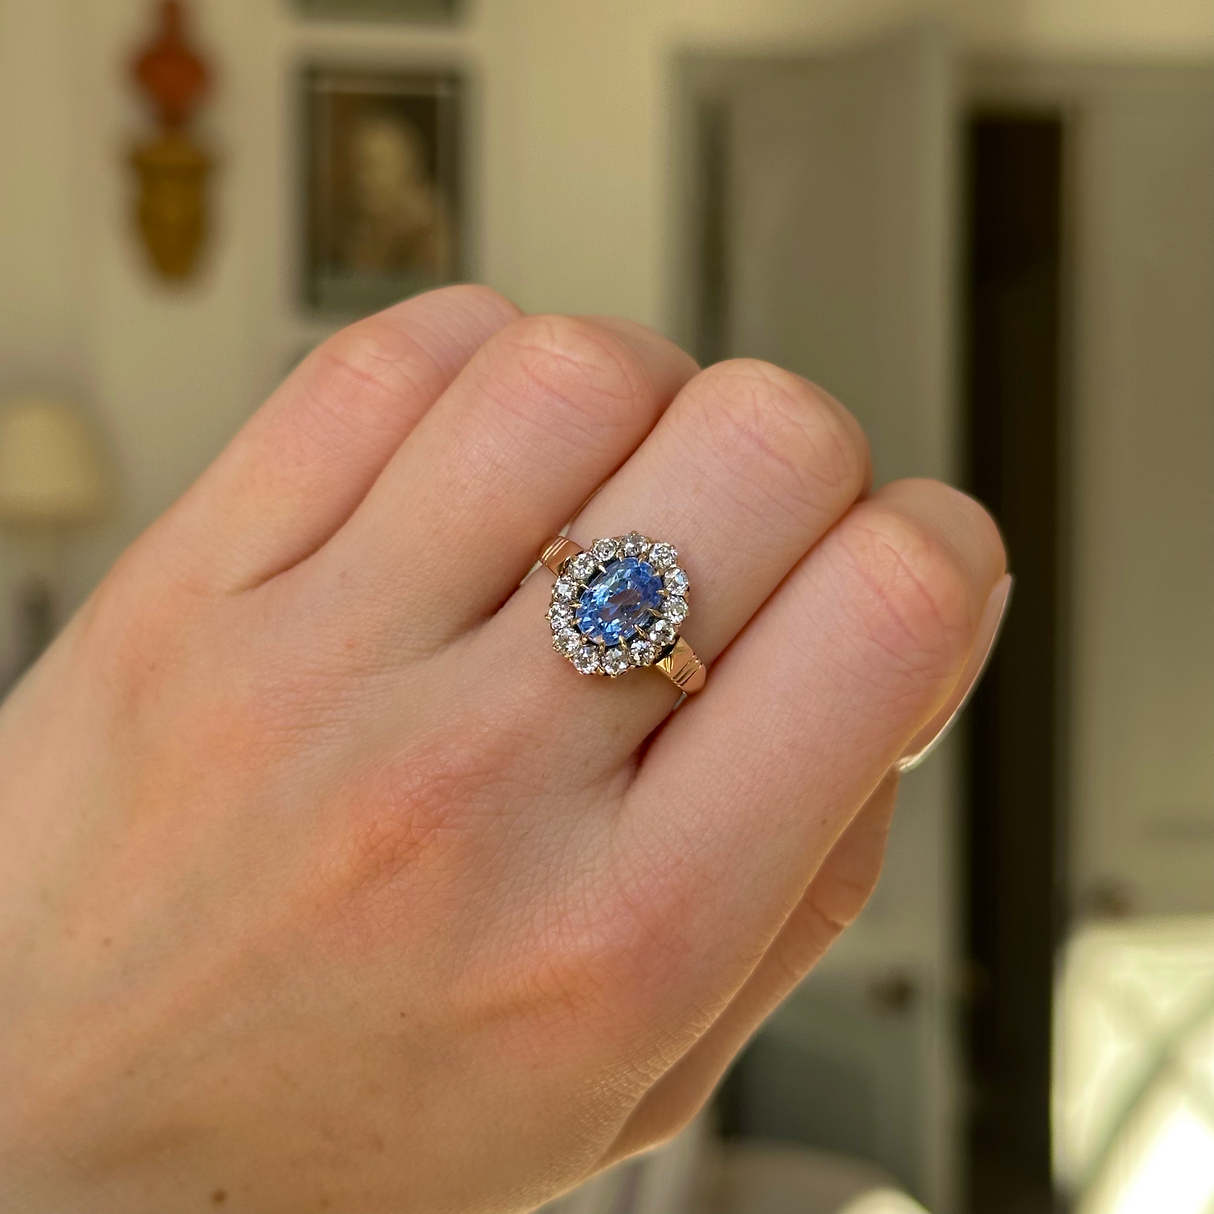 Antique, Edwardian Sapphire and Diamond Cluster Ring, 14ct Yellow Gold worn on closed hand. 